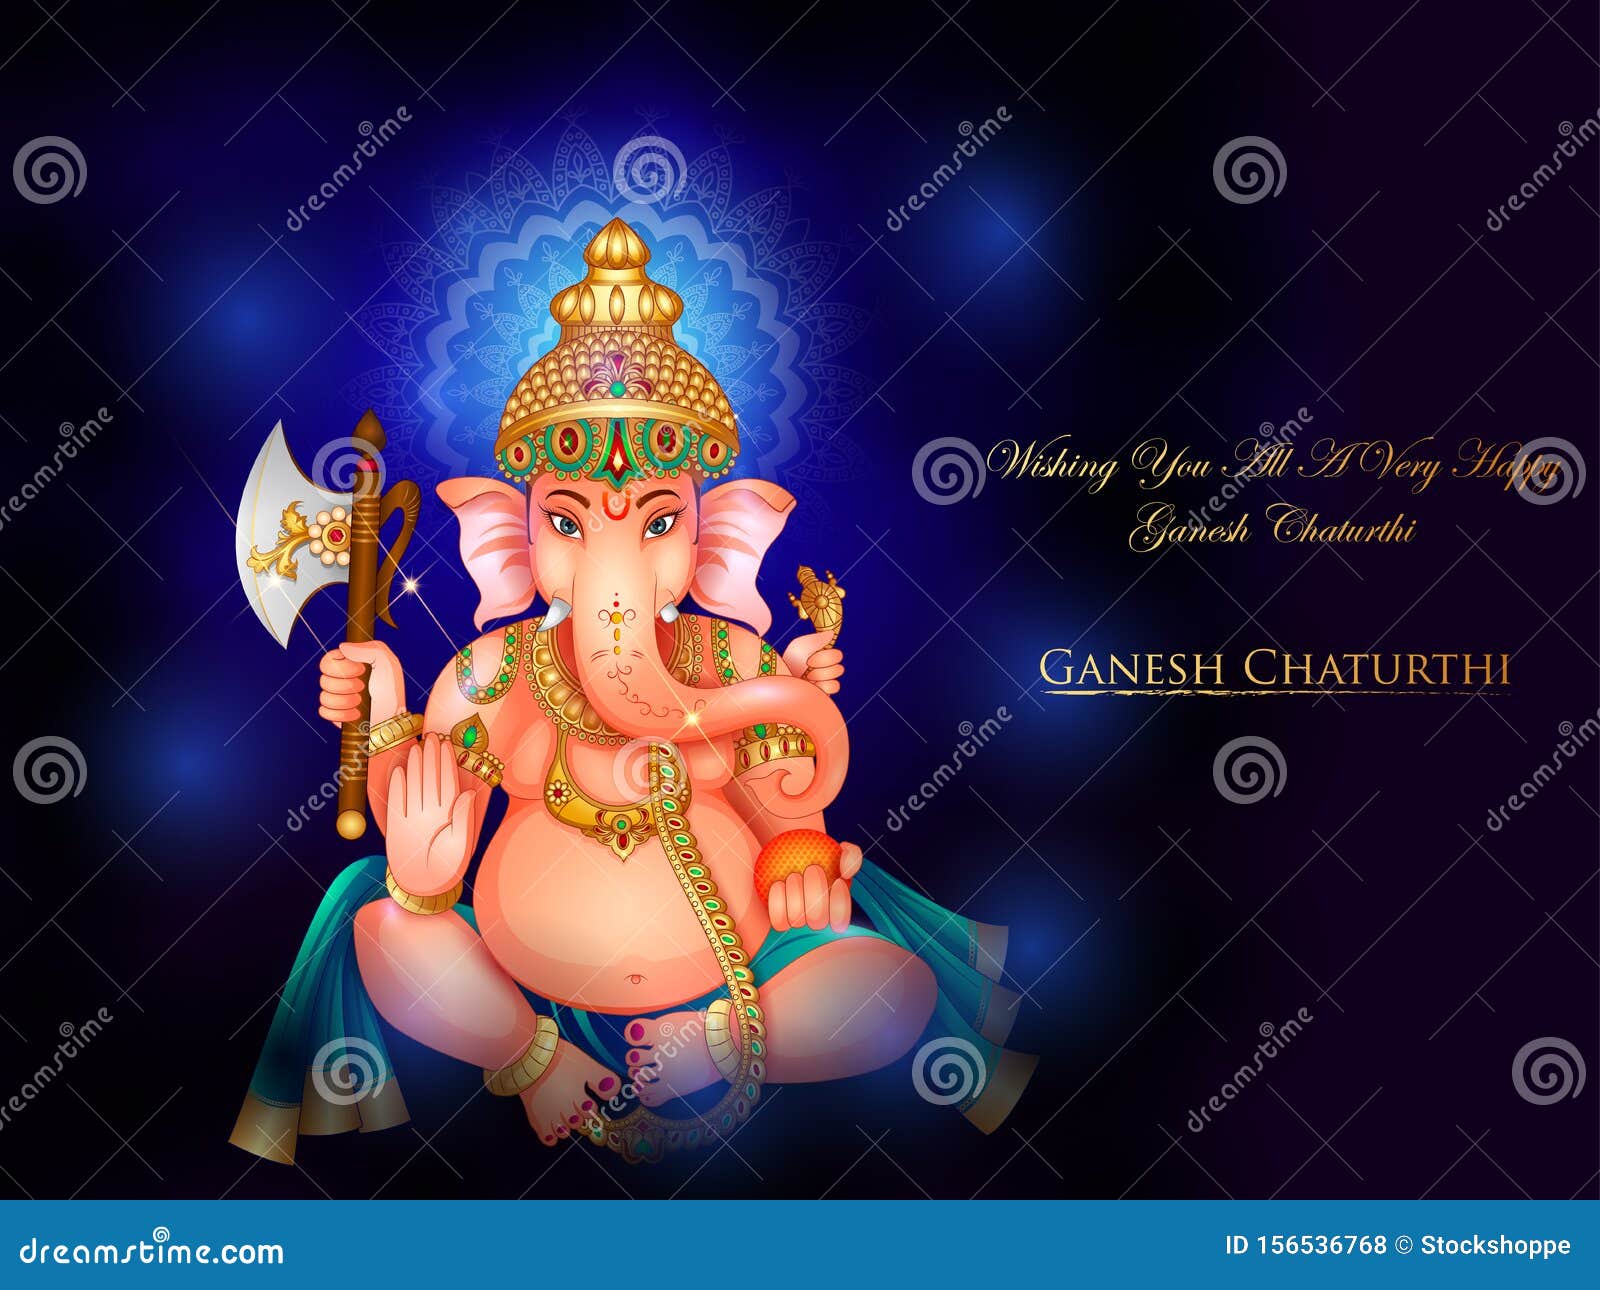 lord ganapati for happy ganesh chaturthi festival religious banner background